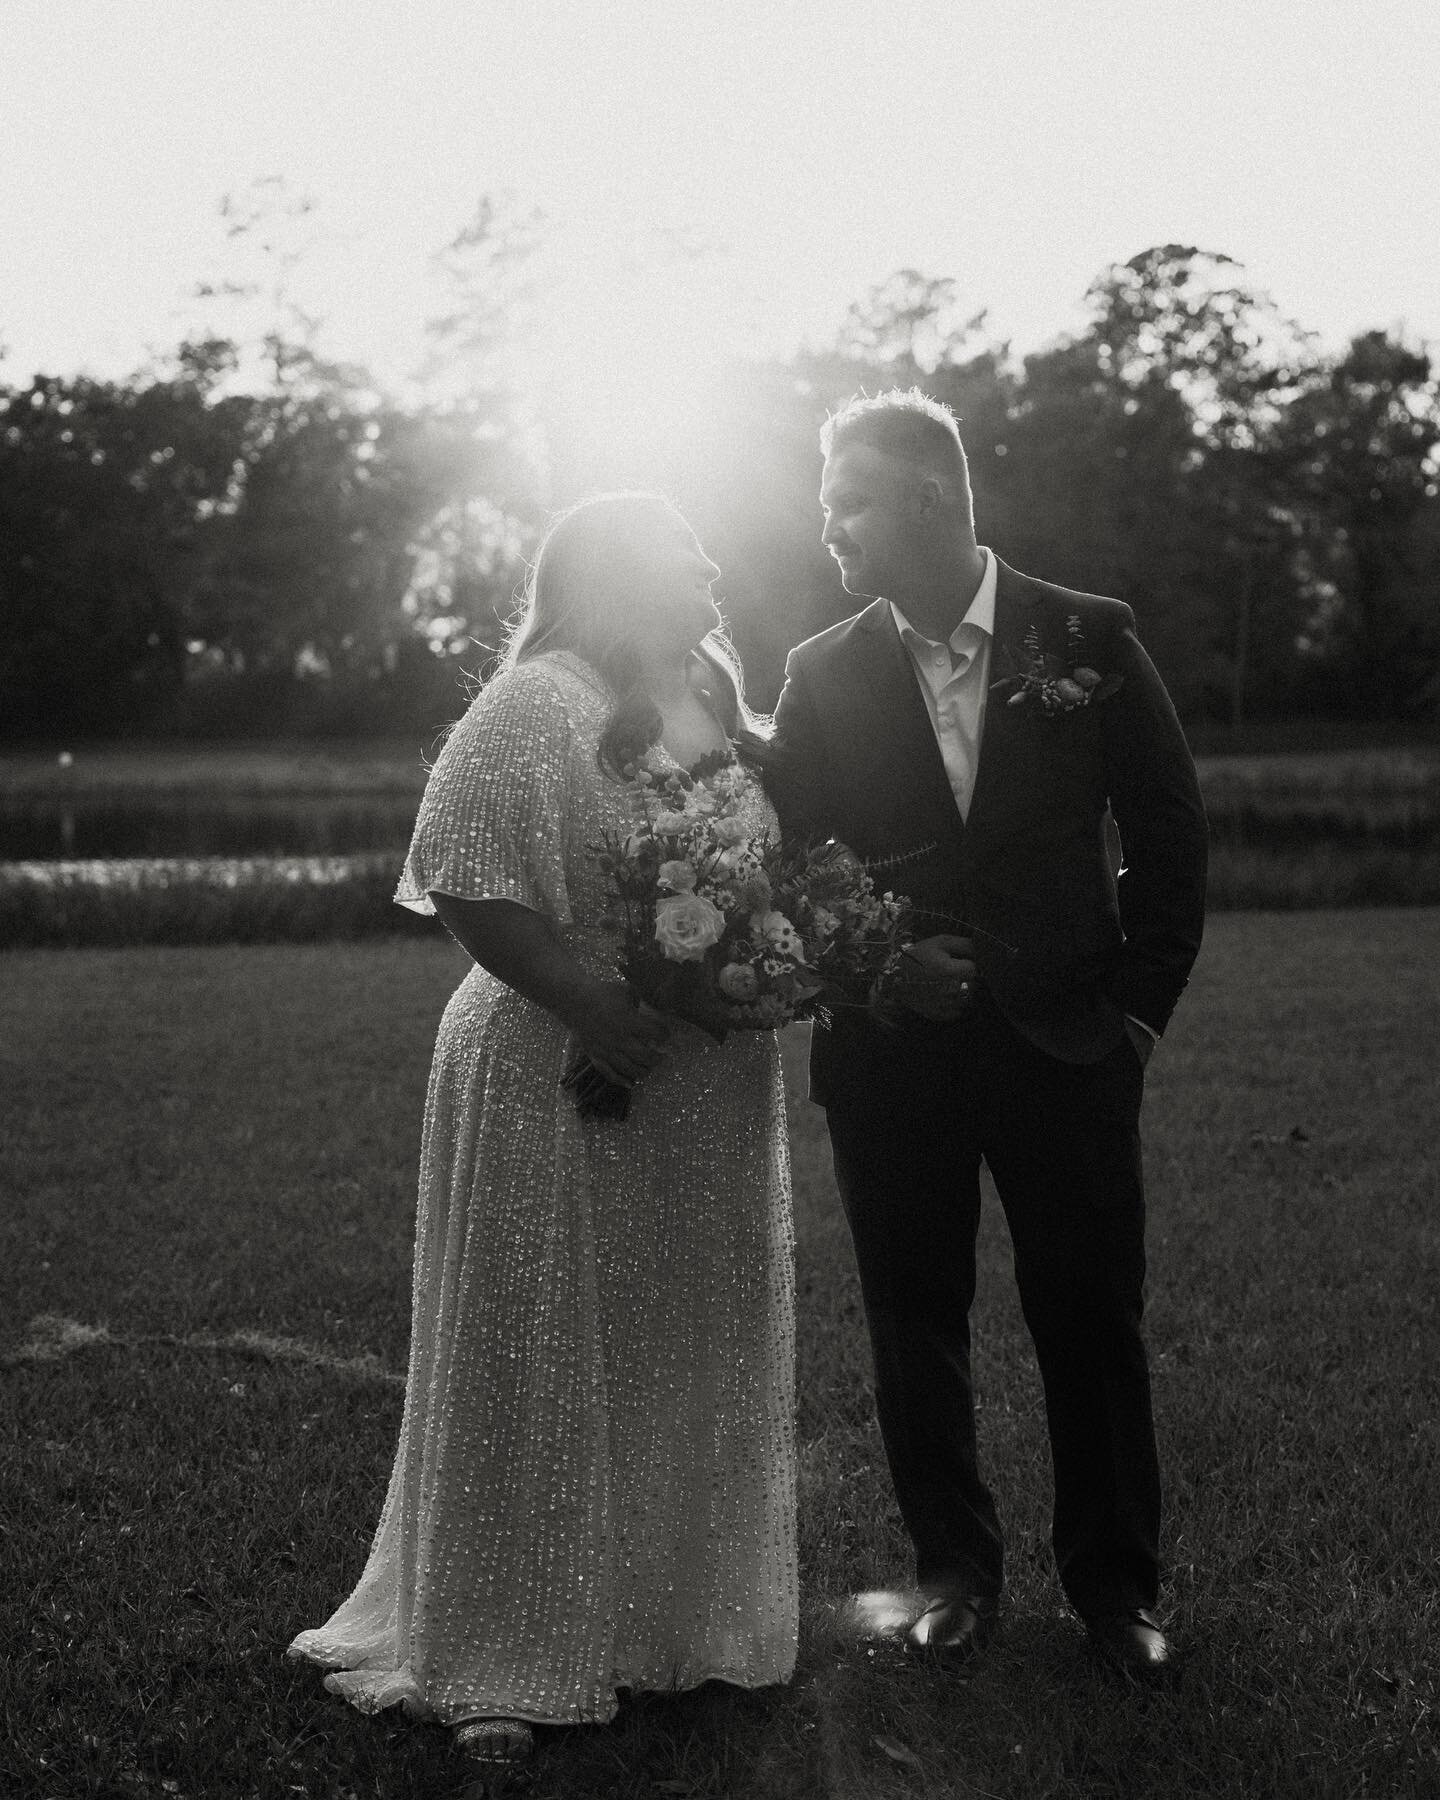 Some of my favorite b&amp;w&rsquo;s from the Carter&rsquo;s wedding 🤍. Ashley&rsquo;s dress shimmering in the light can really be seen here and I&rsquo;m obsessed.